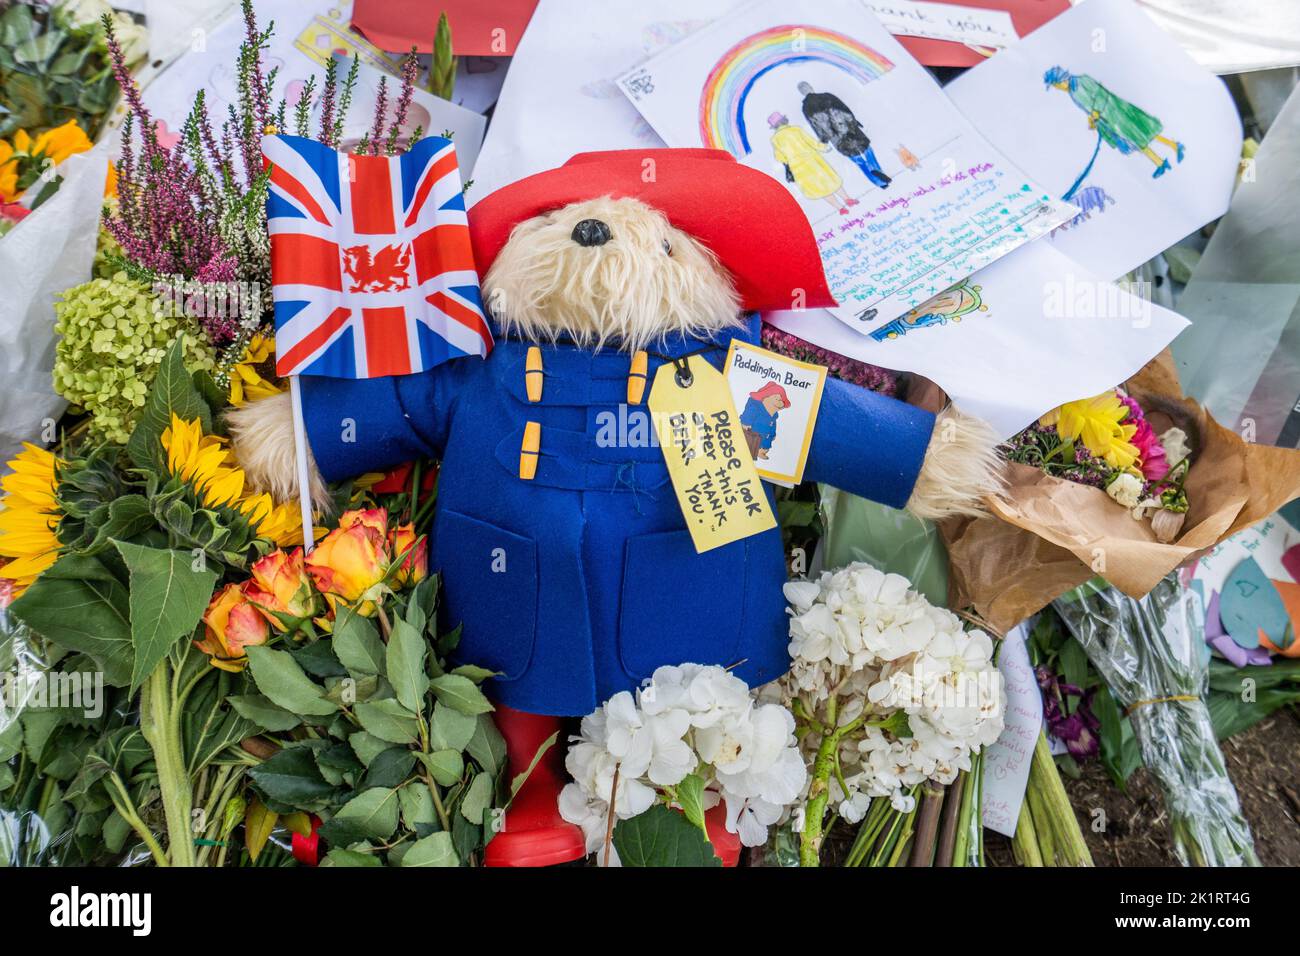 London UK. 20 September 2022. A Paddington bear is placed  in Green Park by members of the public with messages of condolence  as tribute to Queen Elizabeth II .   On Monday 19 September the Queen's coffin was  carried on a gun carriage from Westminster Hall followed by King Charles III and Camilla, Queen Consort after lying in state for four days. which took place will followed by a private interment at St Georges's Chapel in Windsor .Credit: amer ghazzal/Alamy Live News. Stock Photo